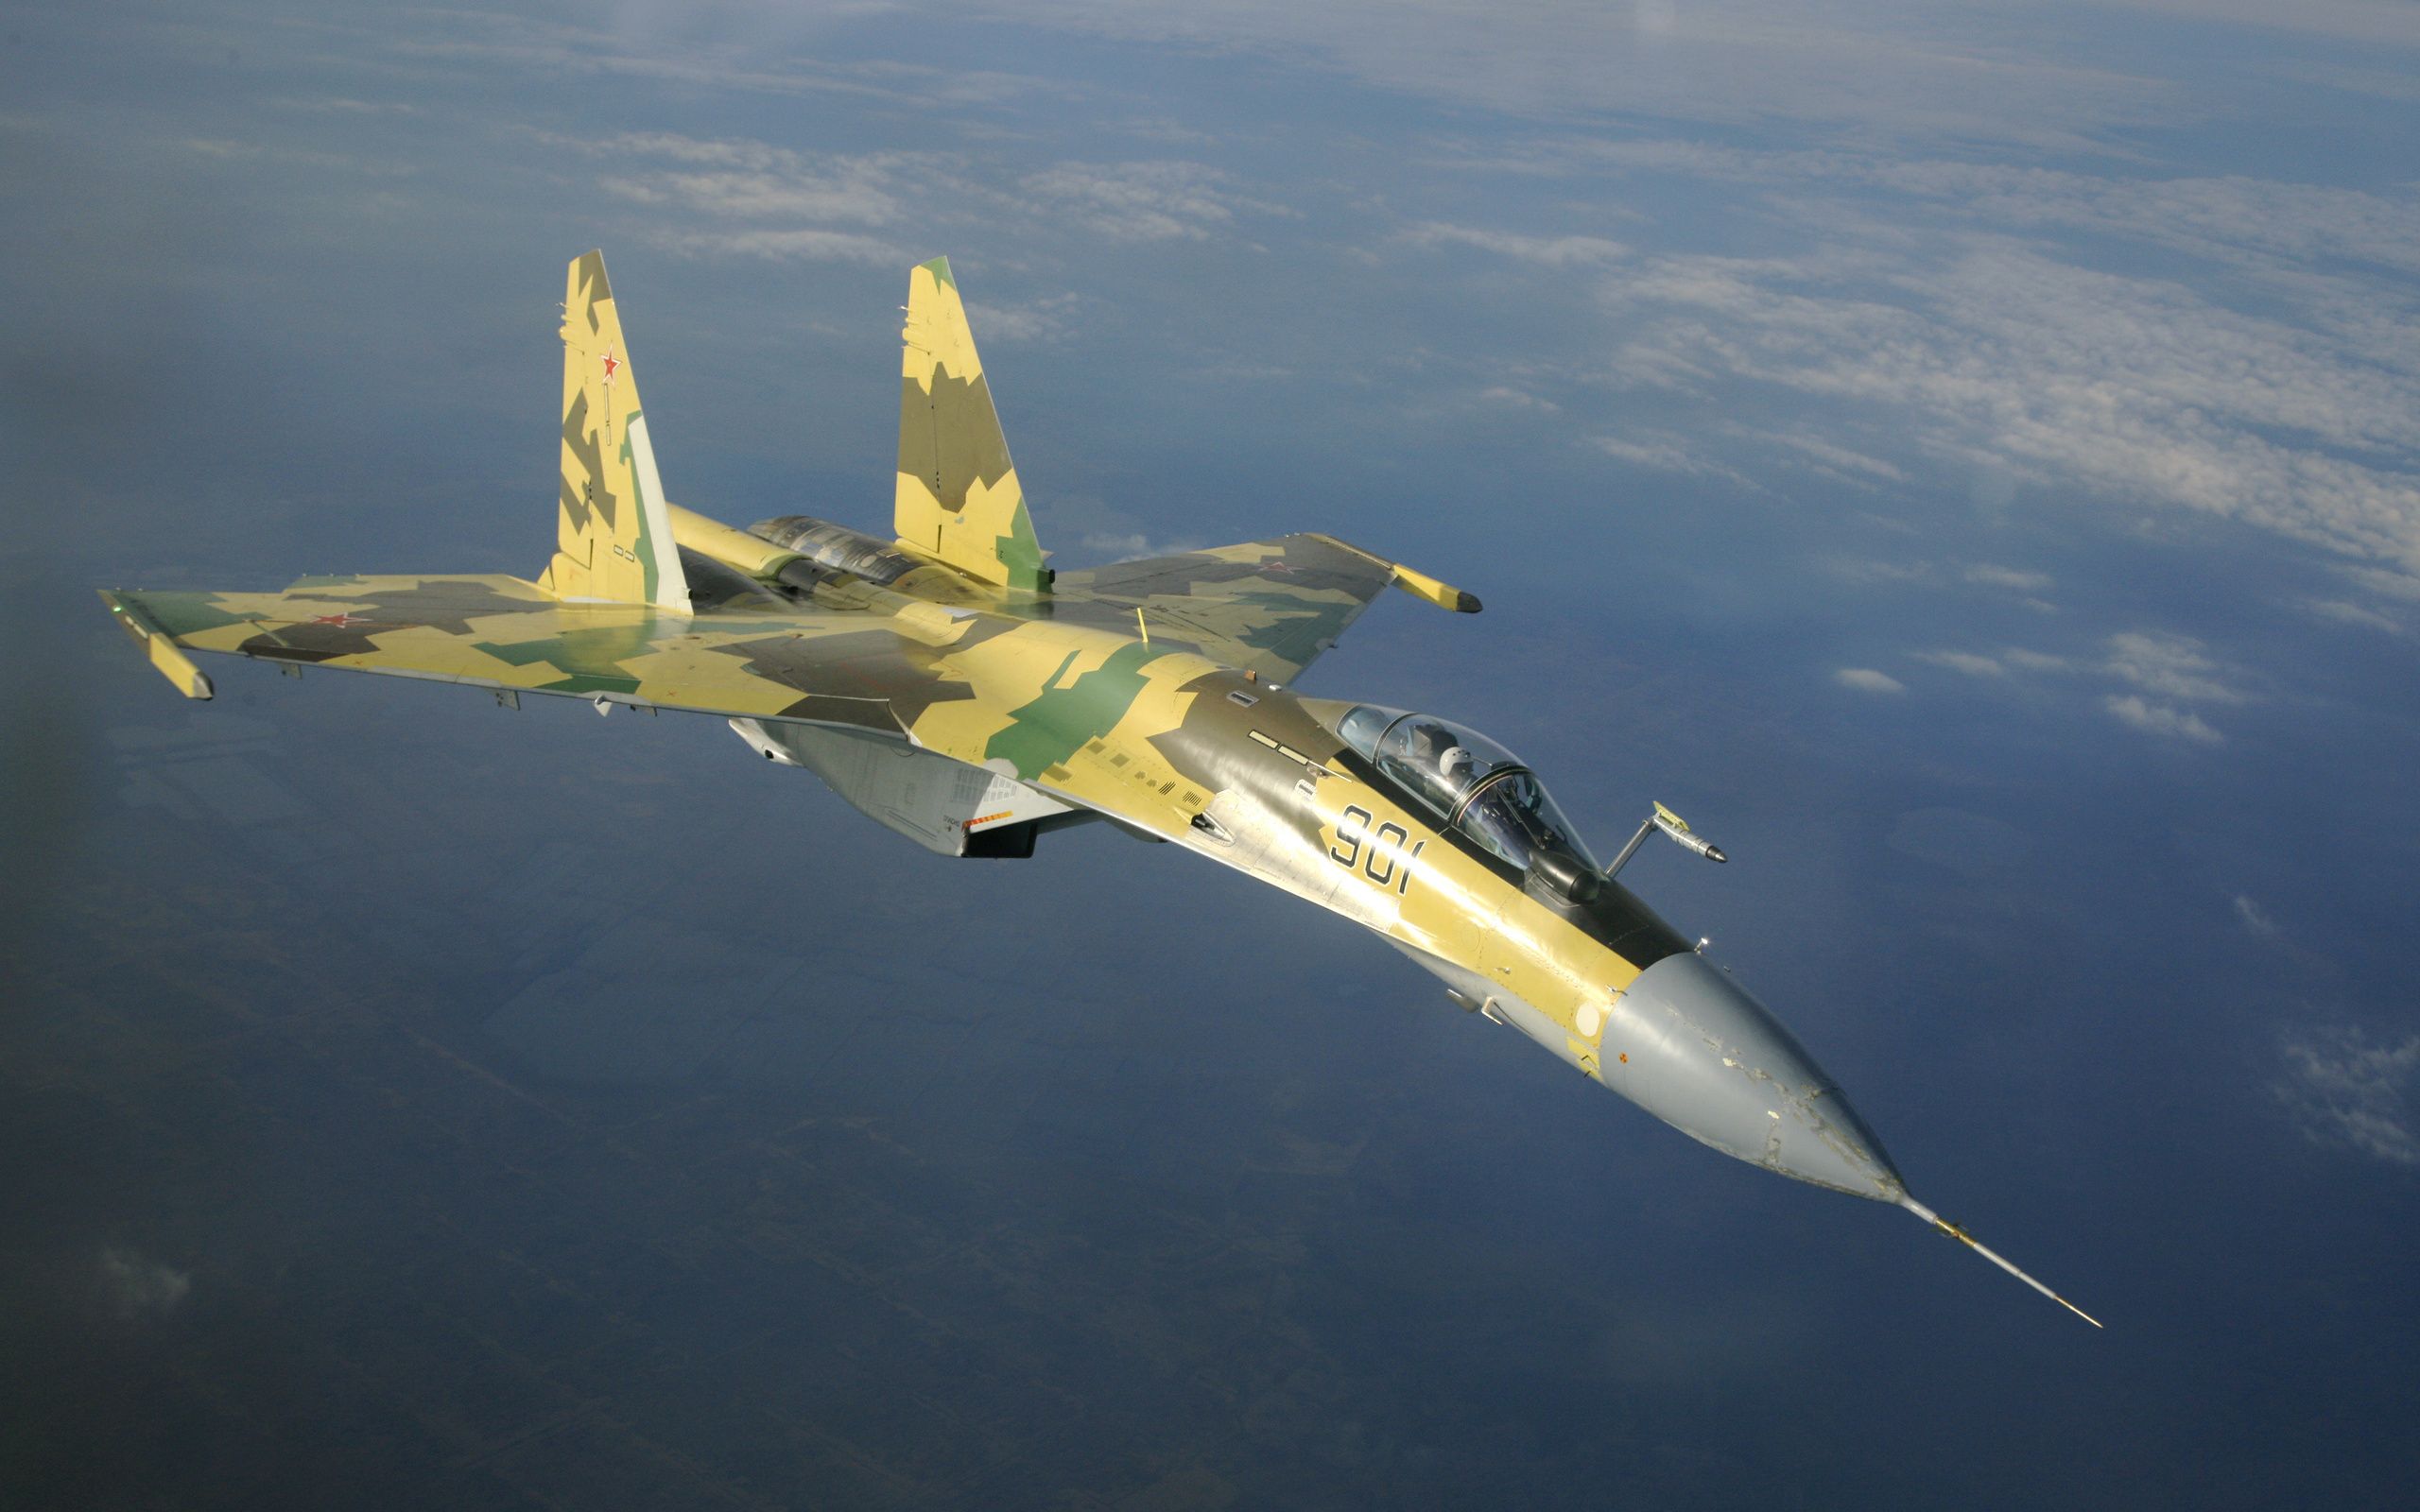 military, sukhoi su 35, air force, aircraft, warplane, jet fighters